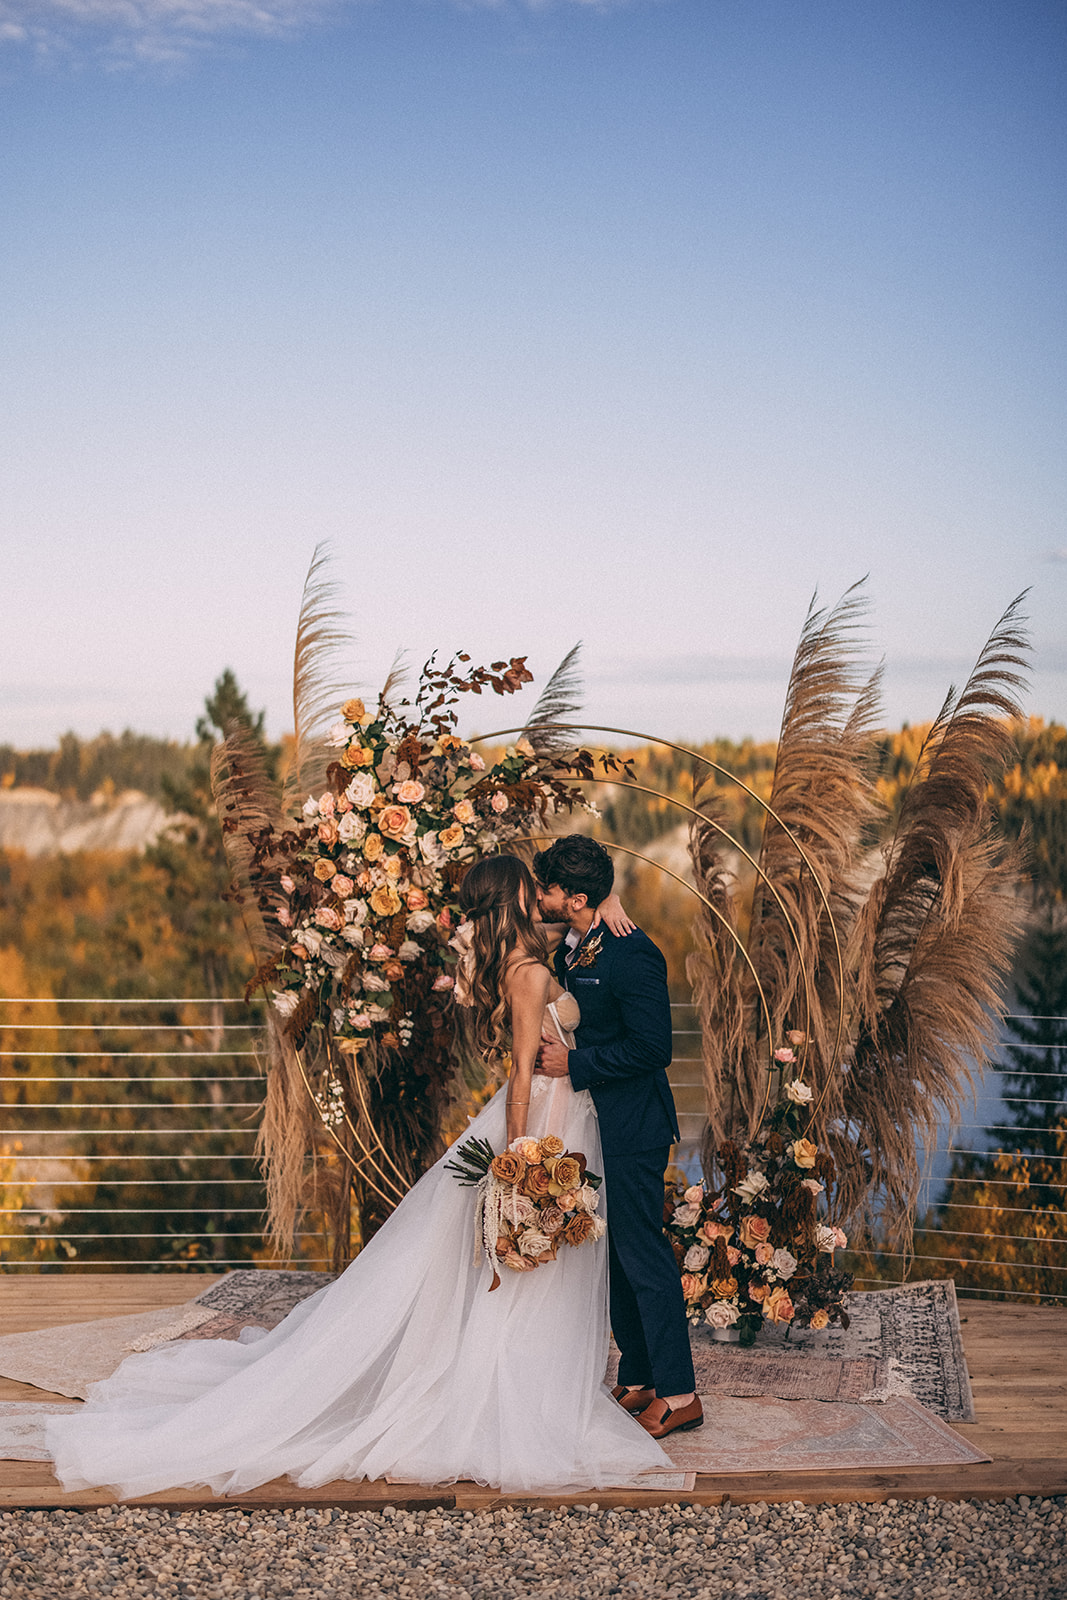 Pampas Grass, String Lights, and A Dramatic Sunset Ceremony Make This New Venue's Debut Feature More Than Memorable